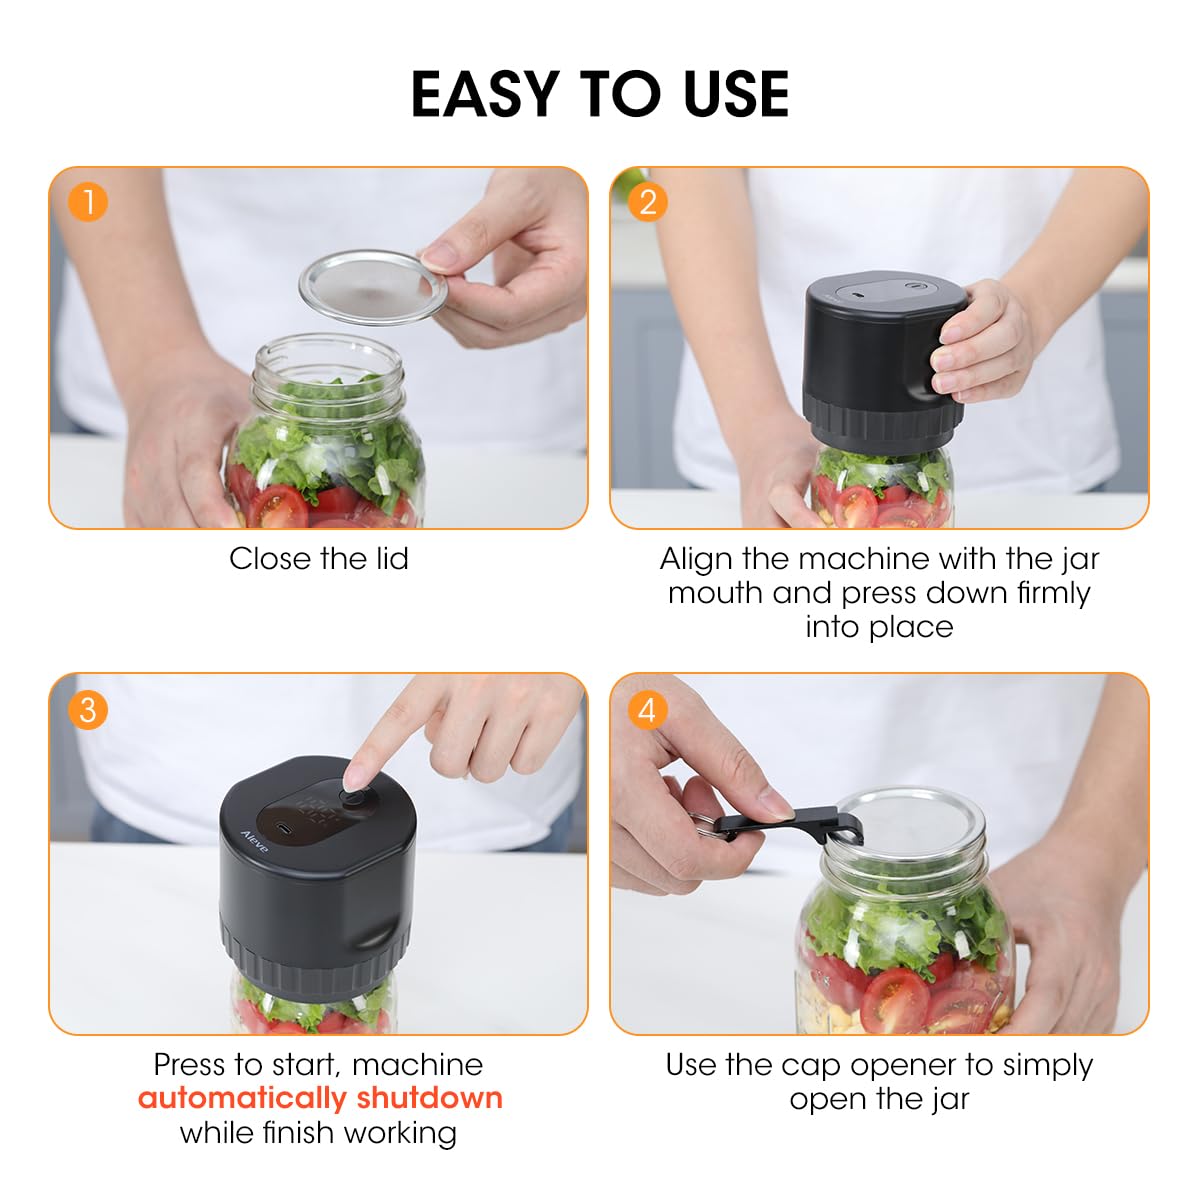 easy to use: 1.Close the lid, 2.align the machine with the jar mouth and press down firmly into place. 3.press to start, machine automatically shutdown while finish working. 4. use the cap opener to simply open the jar